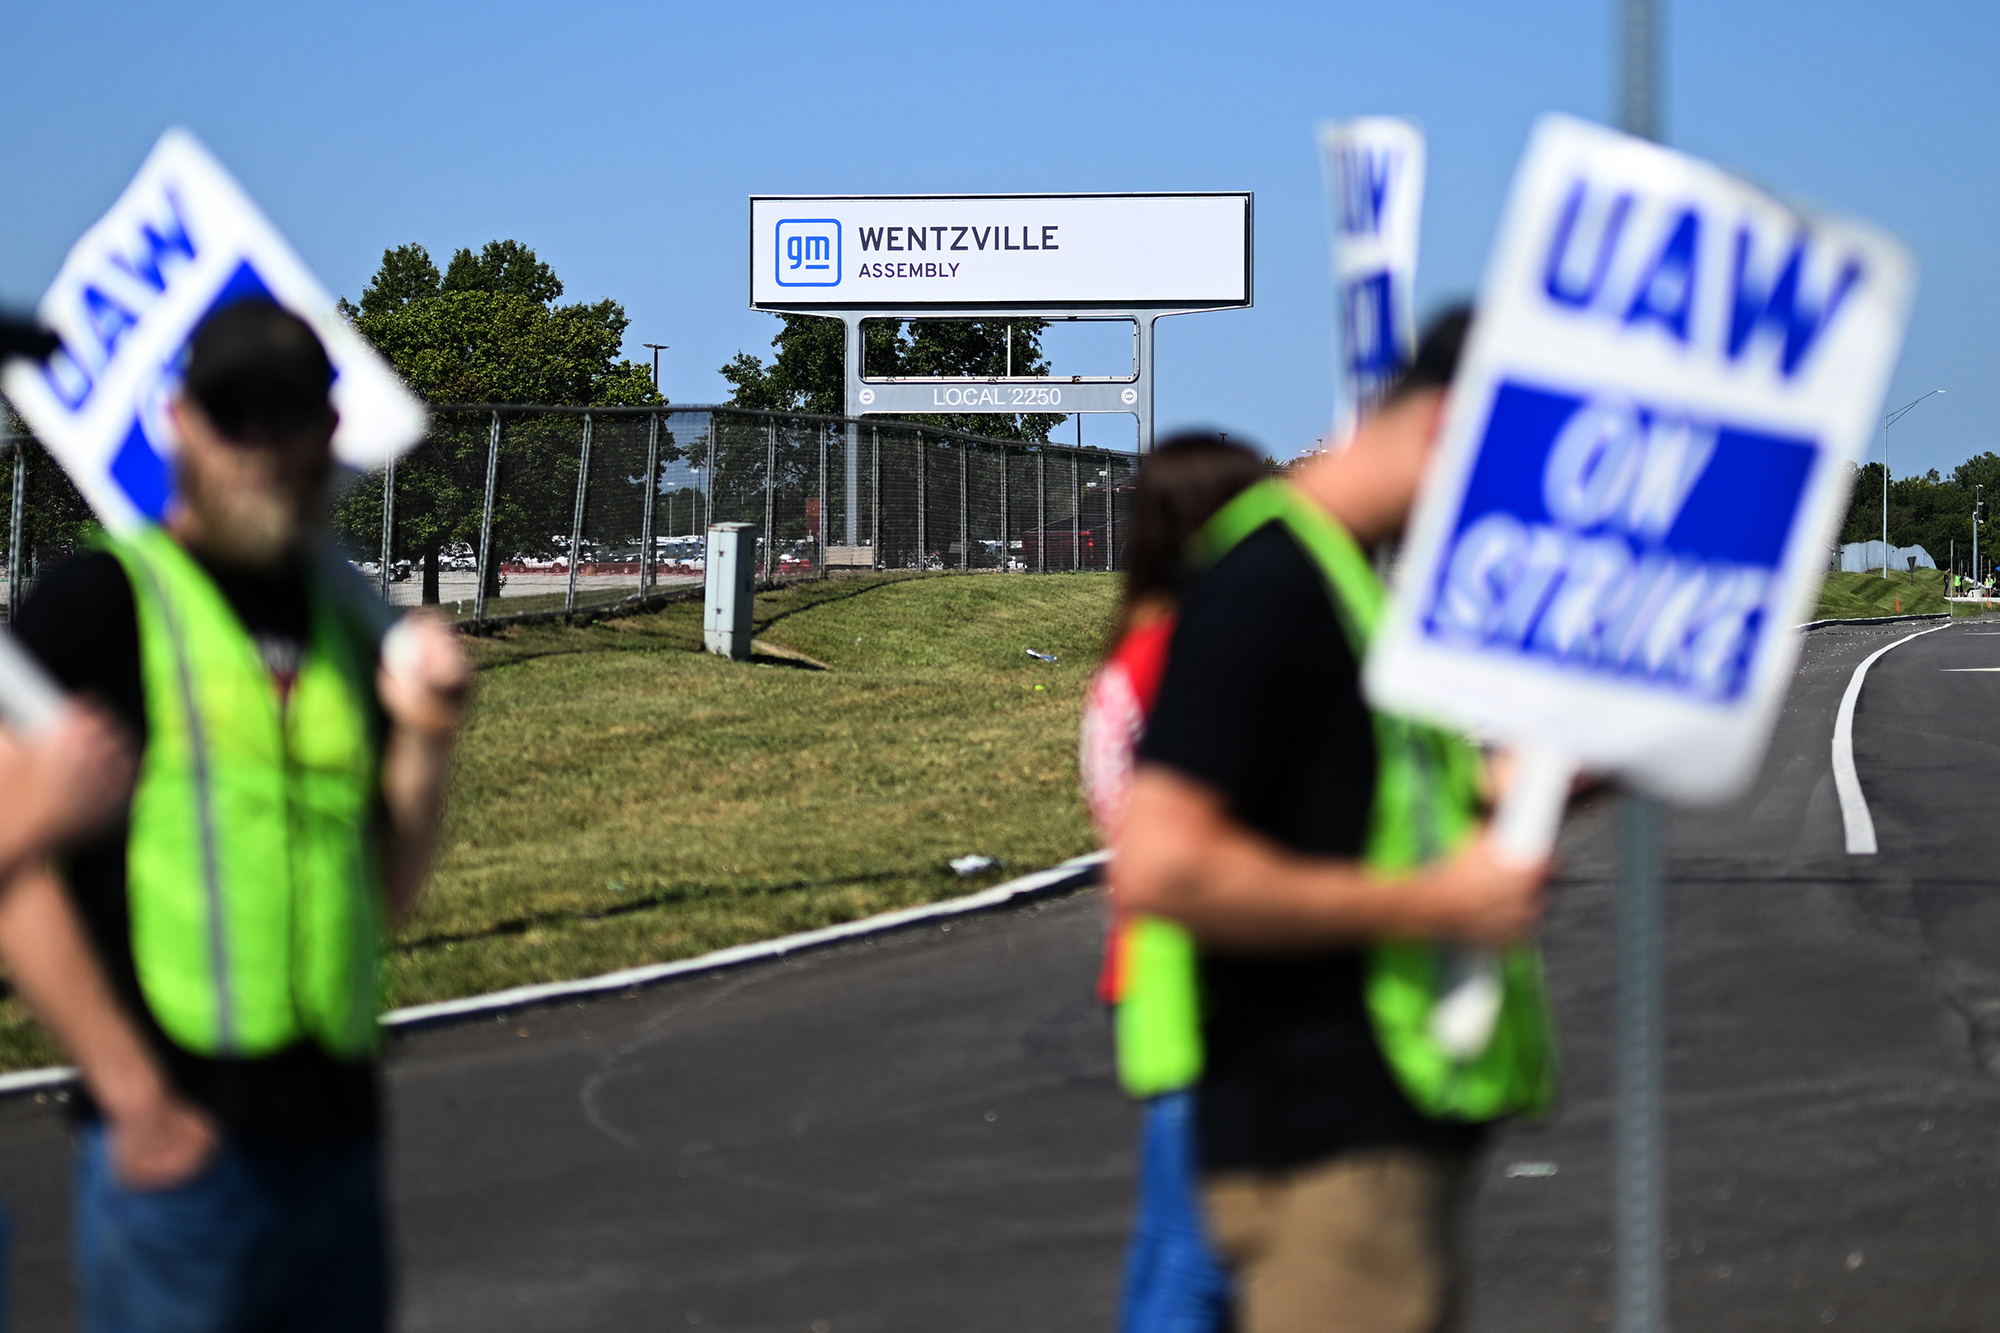 GM workers with the UAW Local 2250 Union strike outside the General Motors Wentzville assembly plant in Wentzville, Missouri.